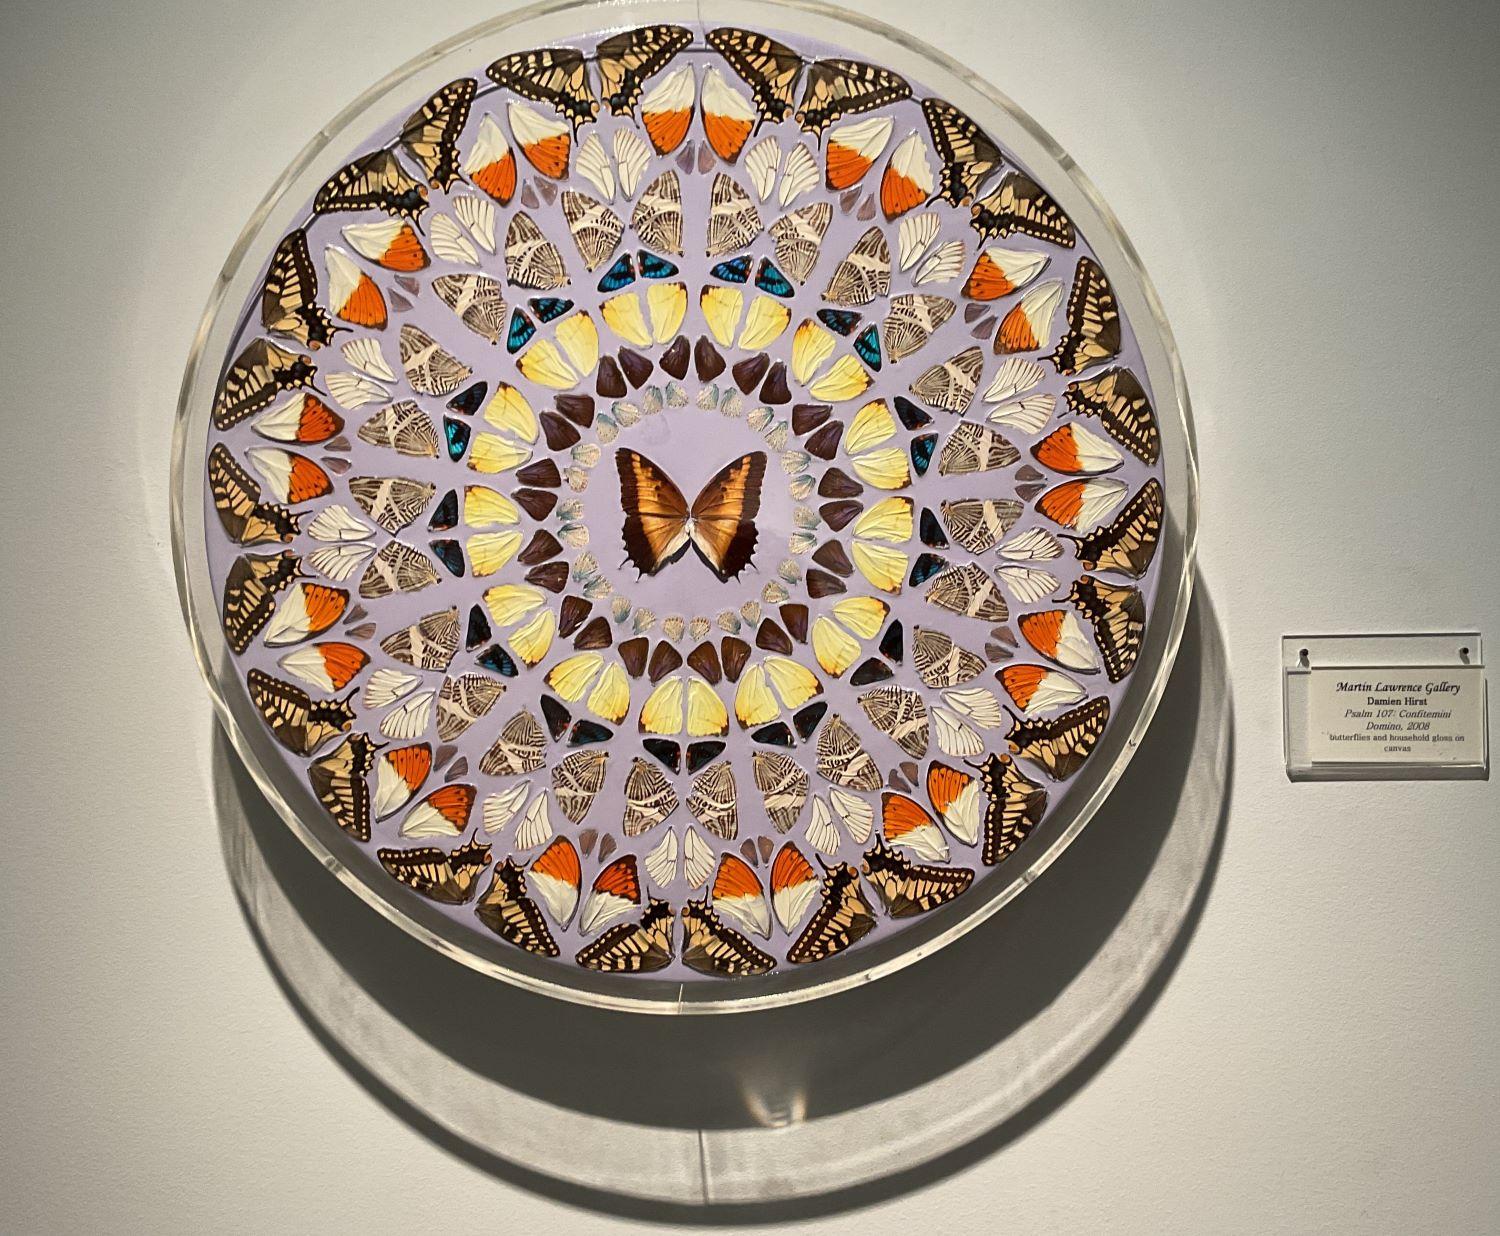 Psalm 107: Confitemini Domino is signed, titled and dated ‘Psalm 107 Damien Hirst 2008’ verso, framed in a contemporary, plexi-box frame.

Hirst’s 'Butterfly Kaleidoscope' paintings, created from the wings of butterflies, are intensely vivid mosaics